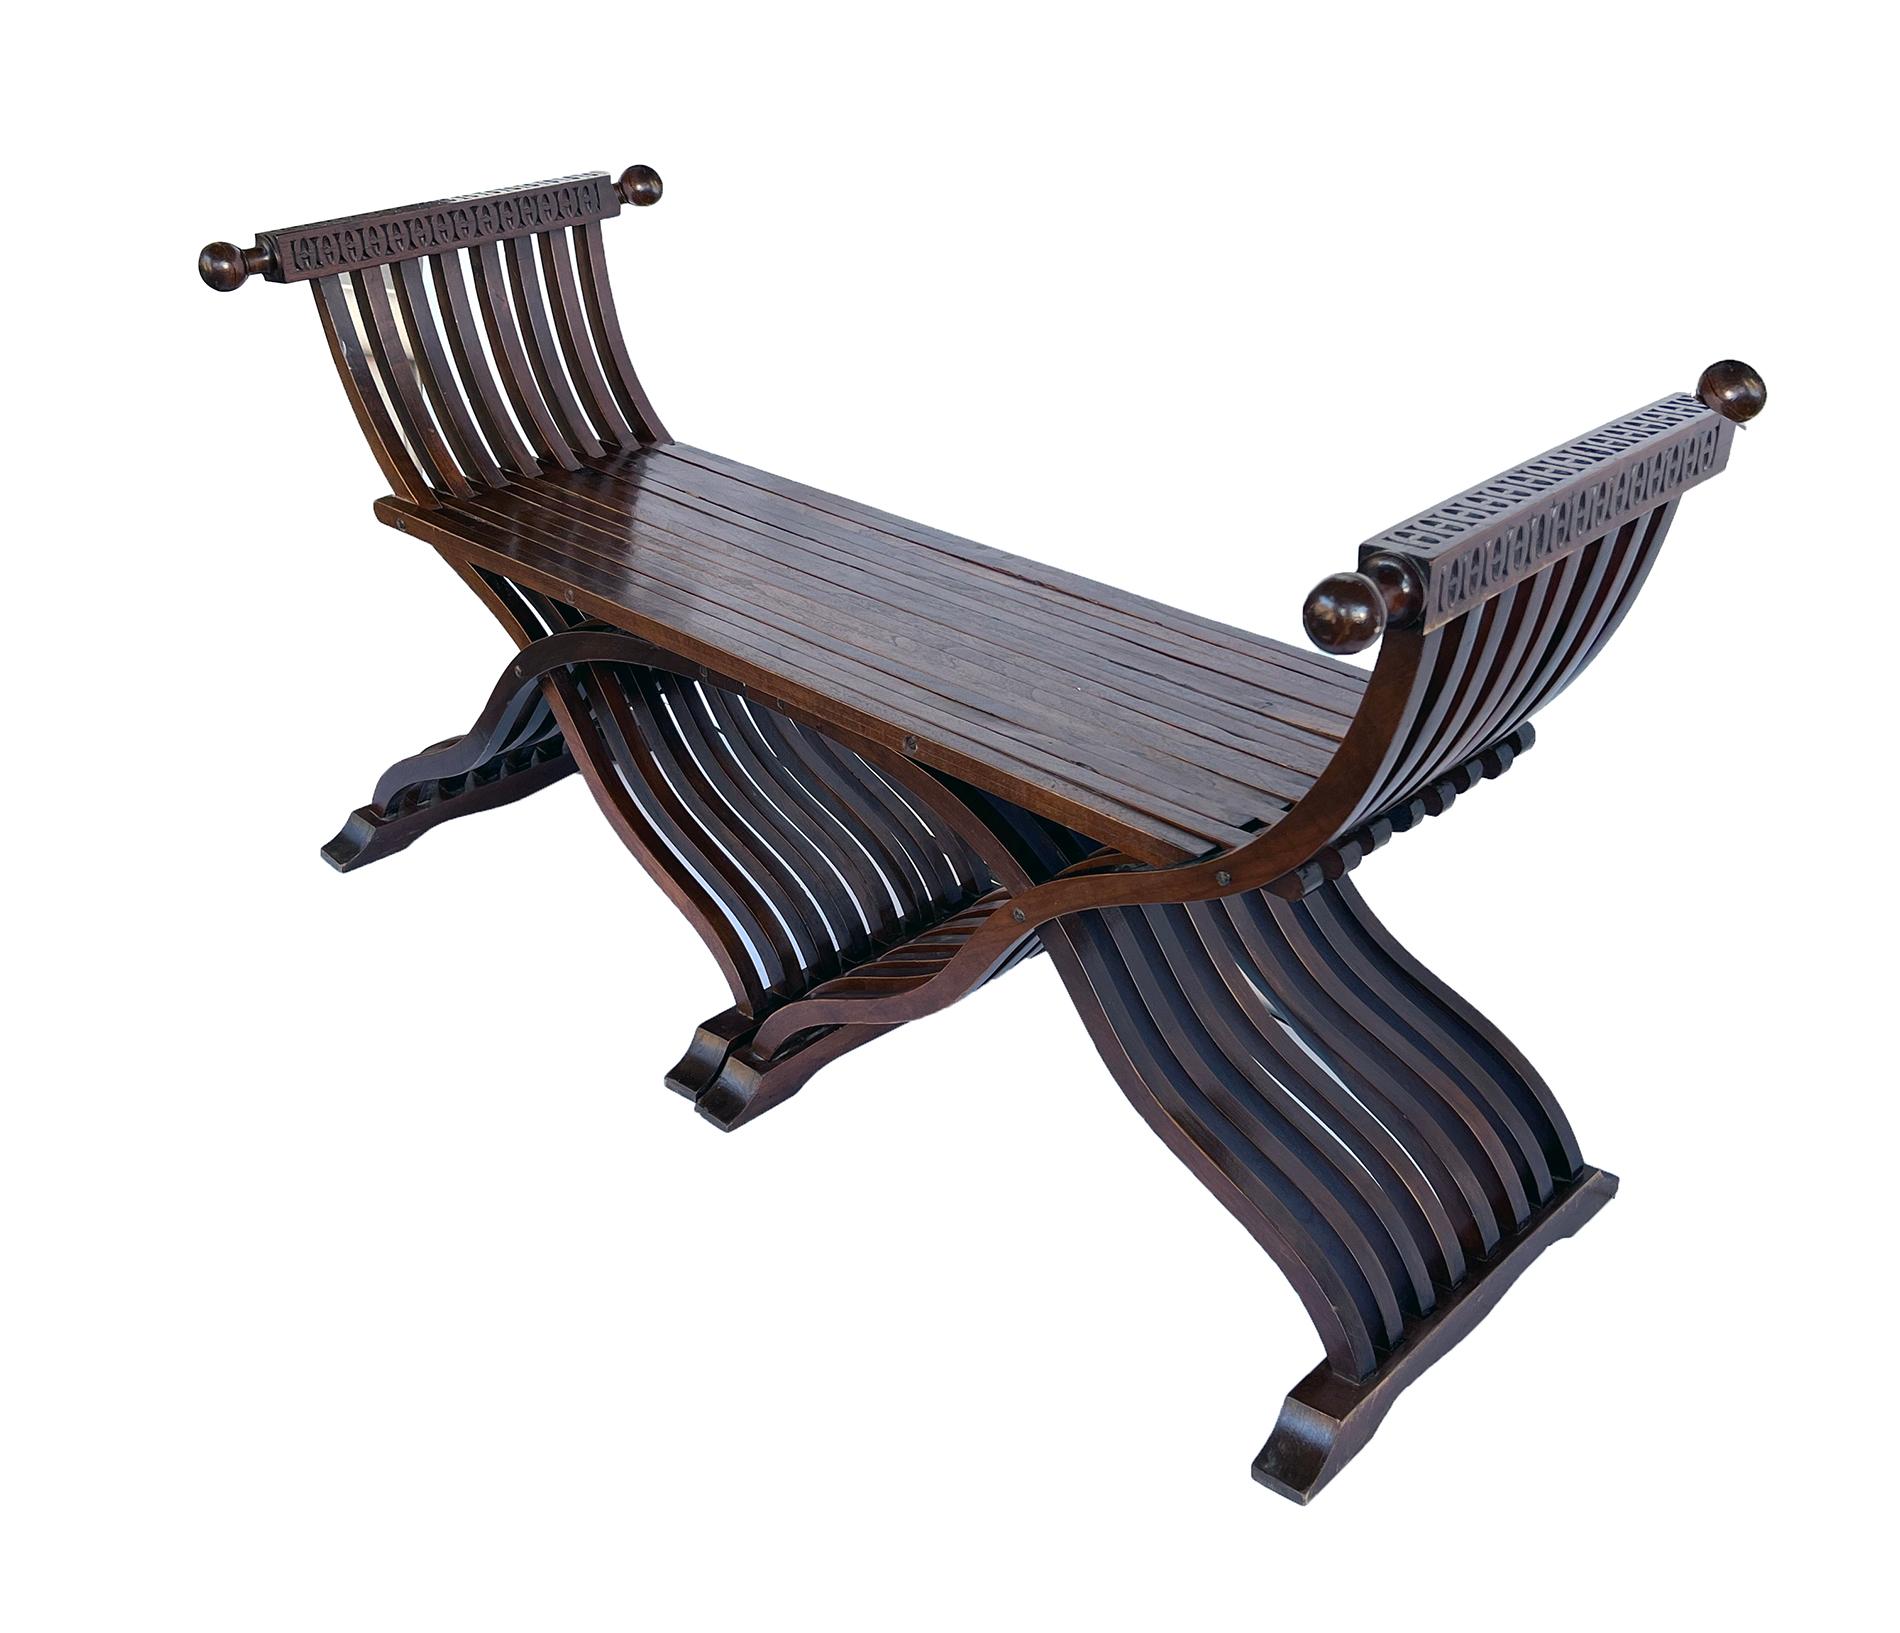 the long seat of slatted wood flanked by incurved arms with ball-form handholds; raised on a folding scissors double base; the term Savonarola derives from the chair on which the Savonarola used to sit in the convent of San Marco in Florence. The